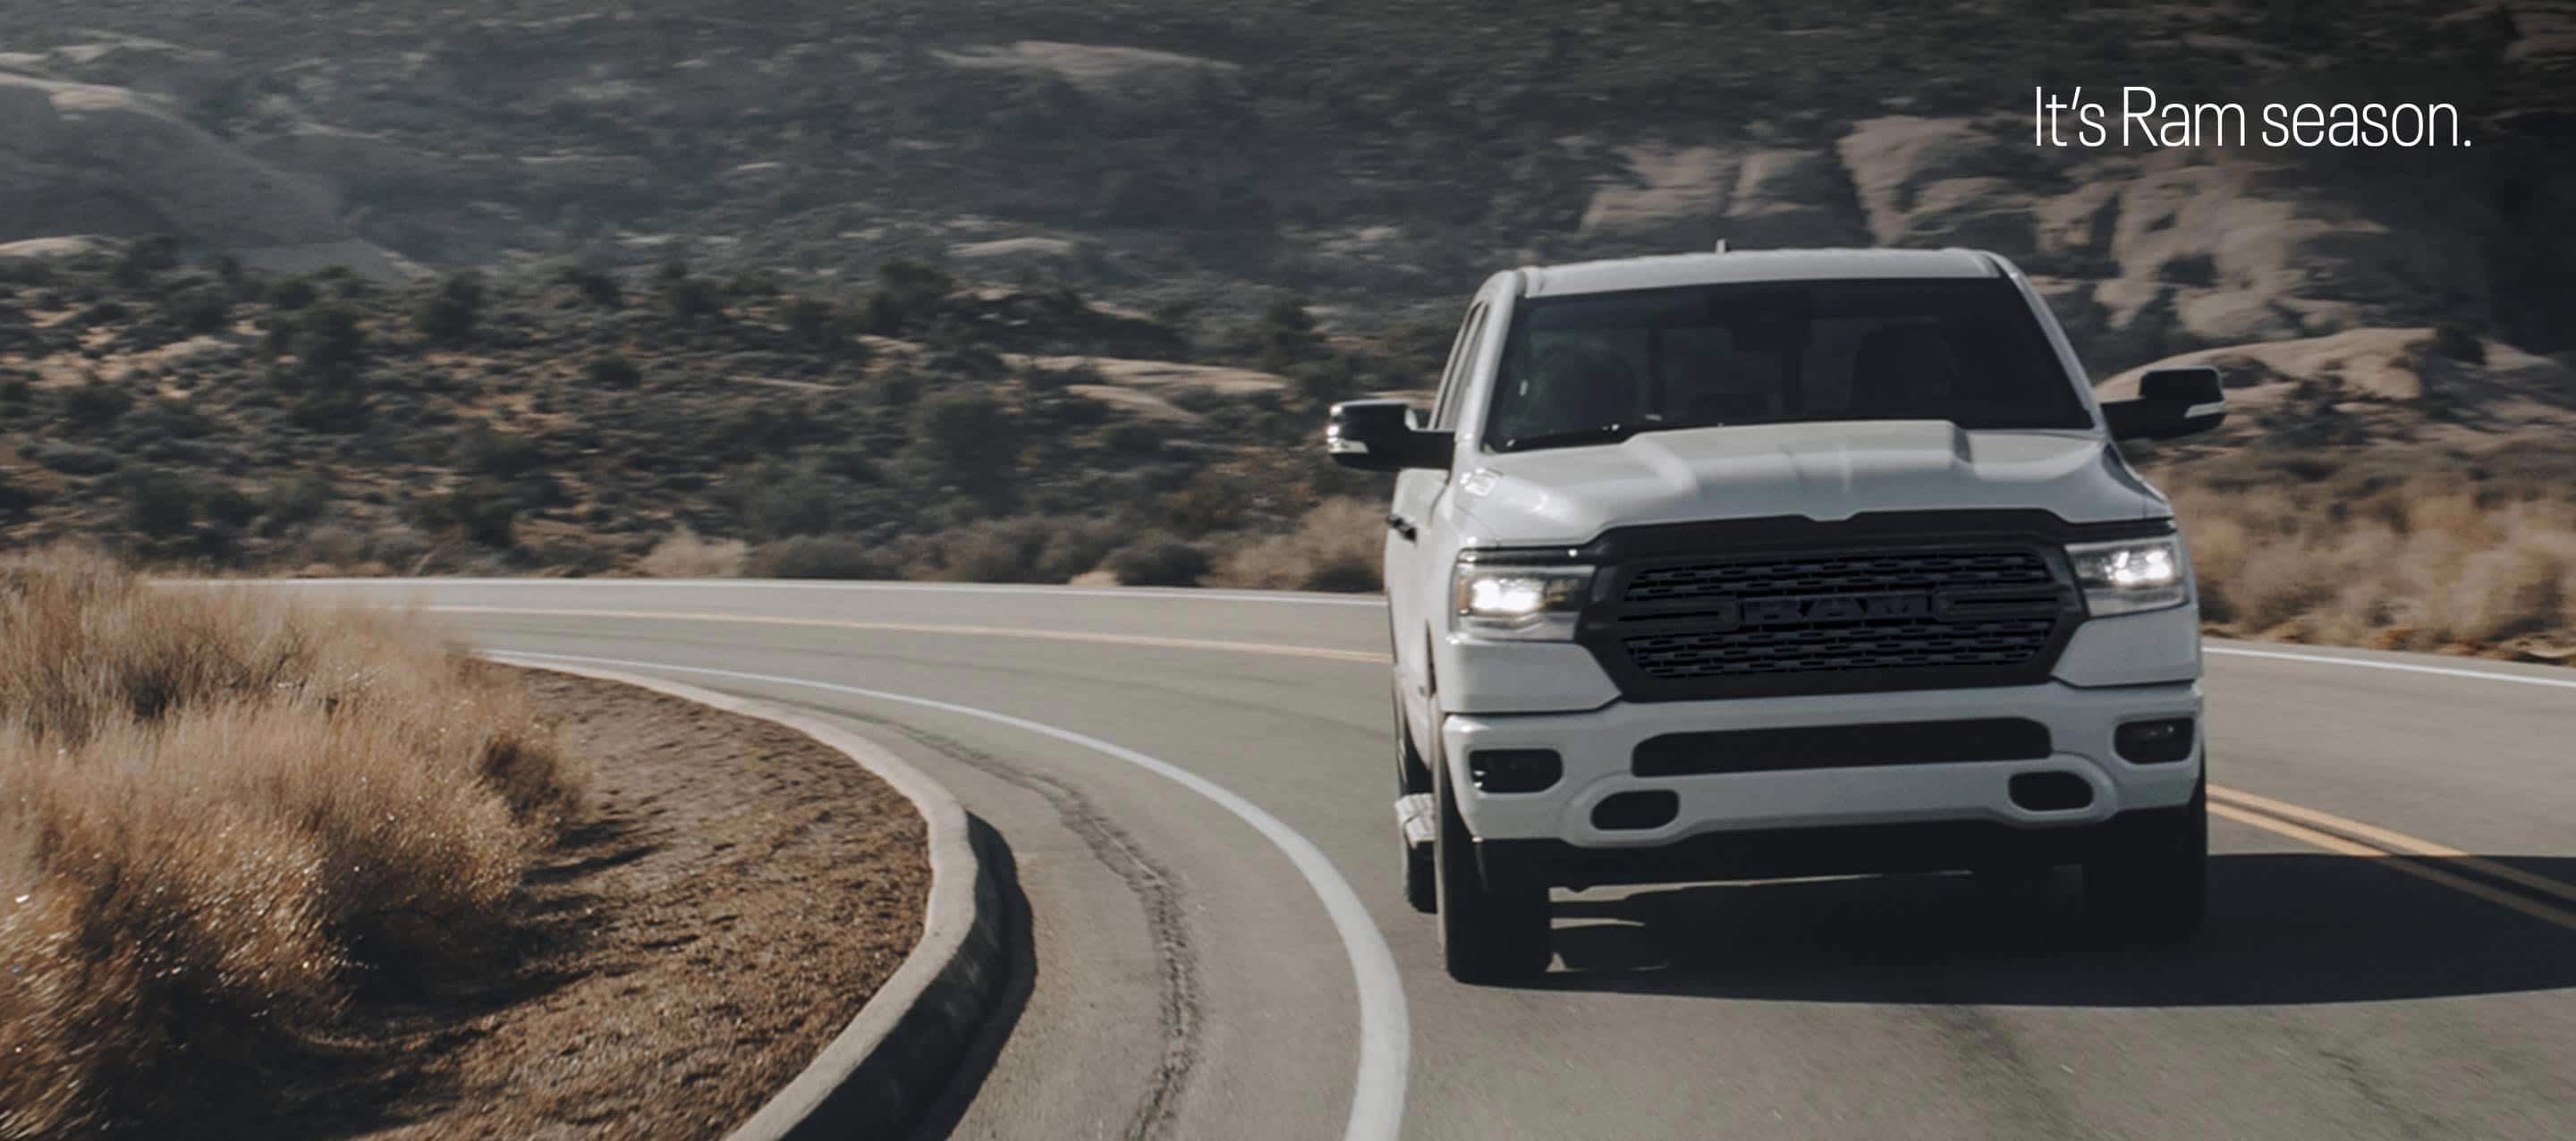 A head-on angle of a white 2023 Ram 1500 Big Horn 4x4 Crew Cab being driven up a curved mountain road in the desert. It's Ram Season.